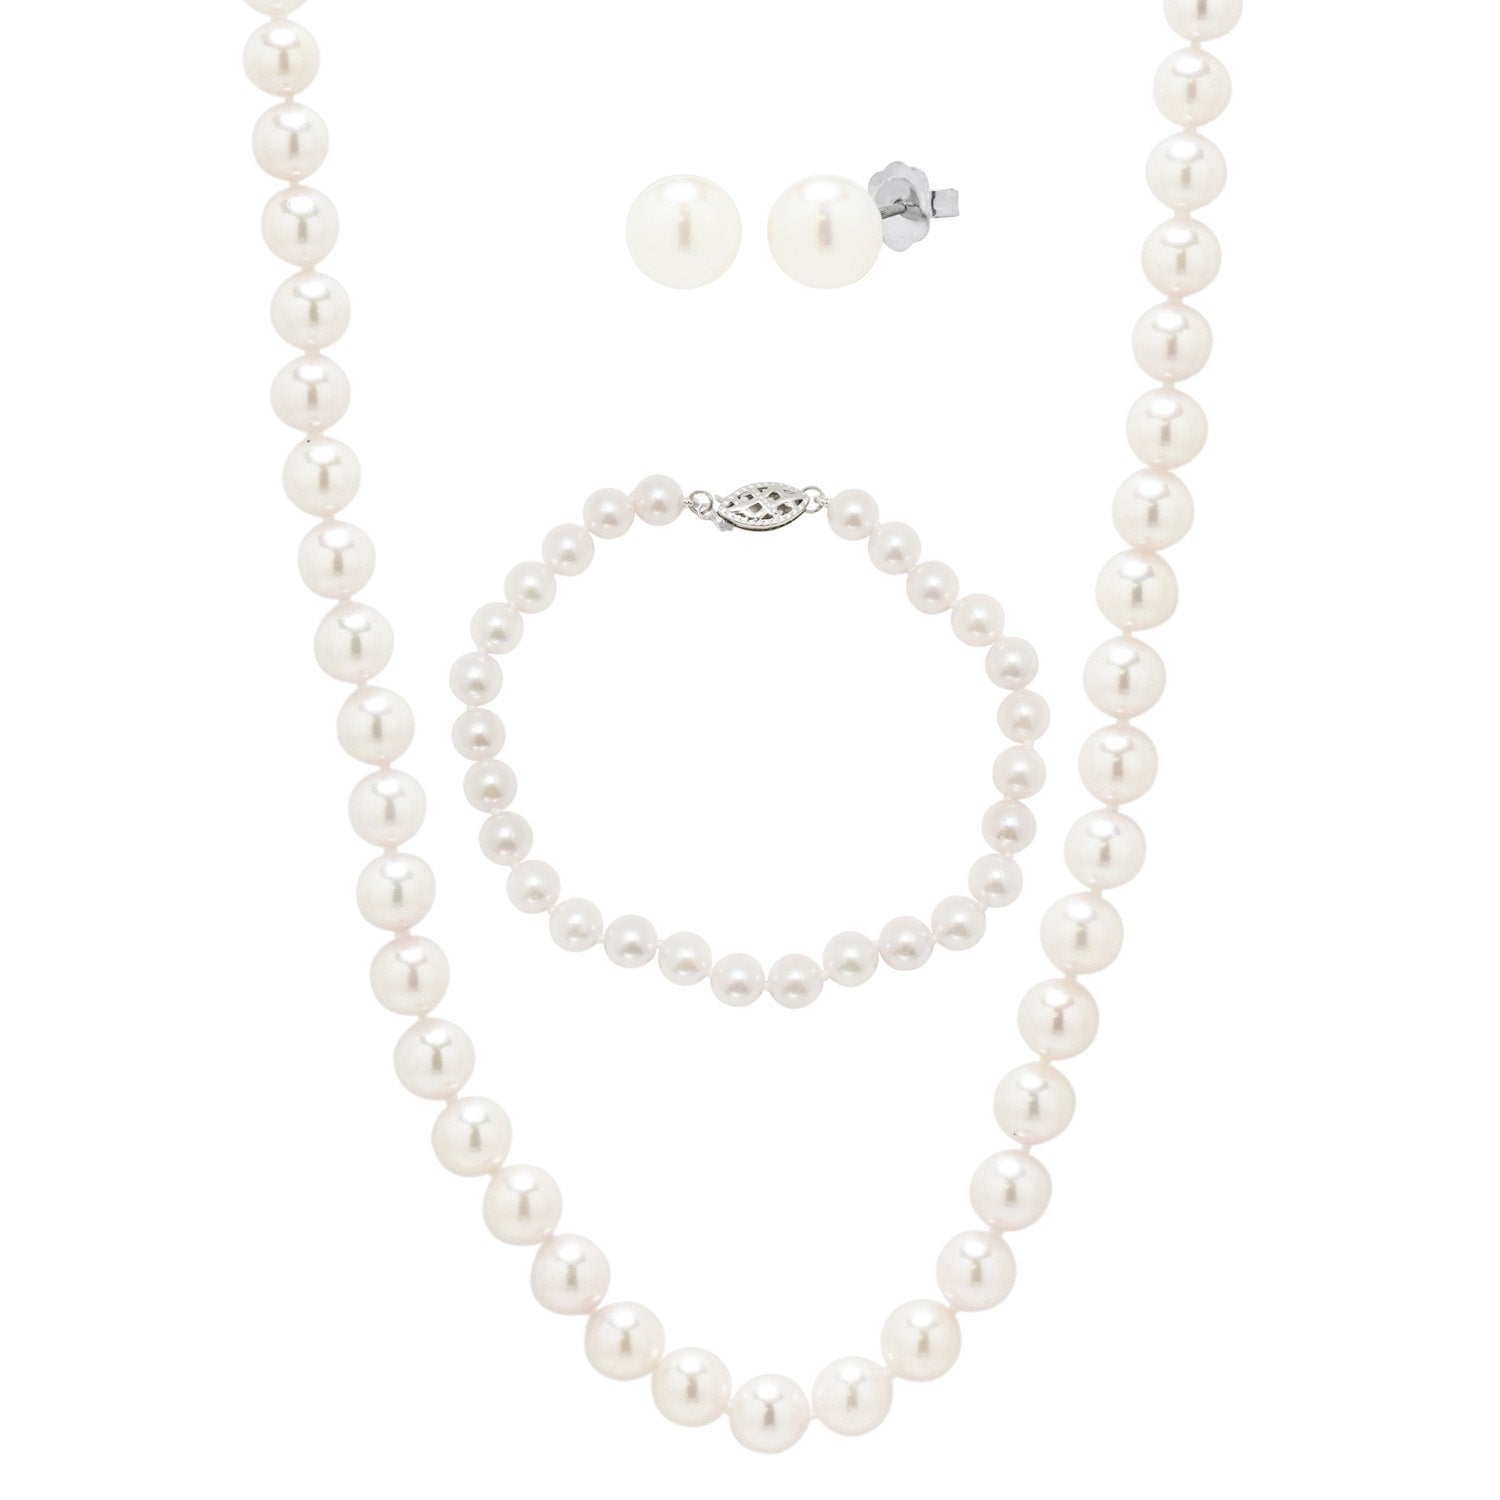 Cultured Akoya Pearl Earrings Necklace and Bracelet Set in 14kt White Gold (6-6.5mm pearls)